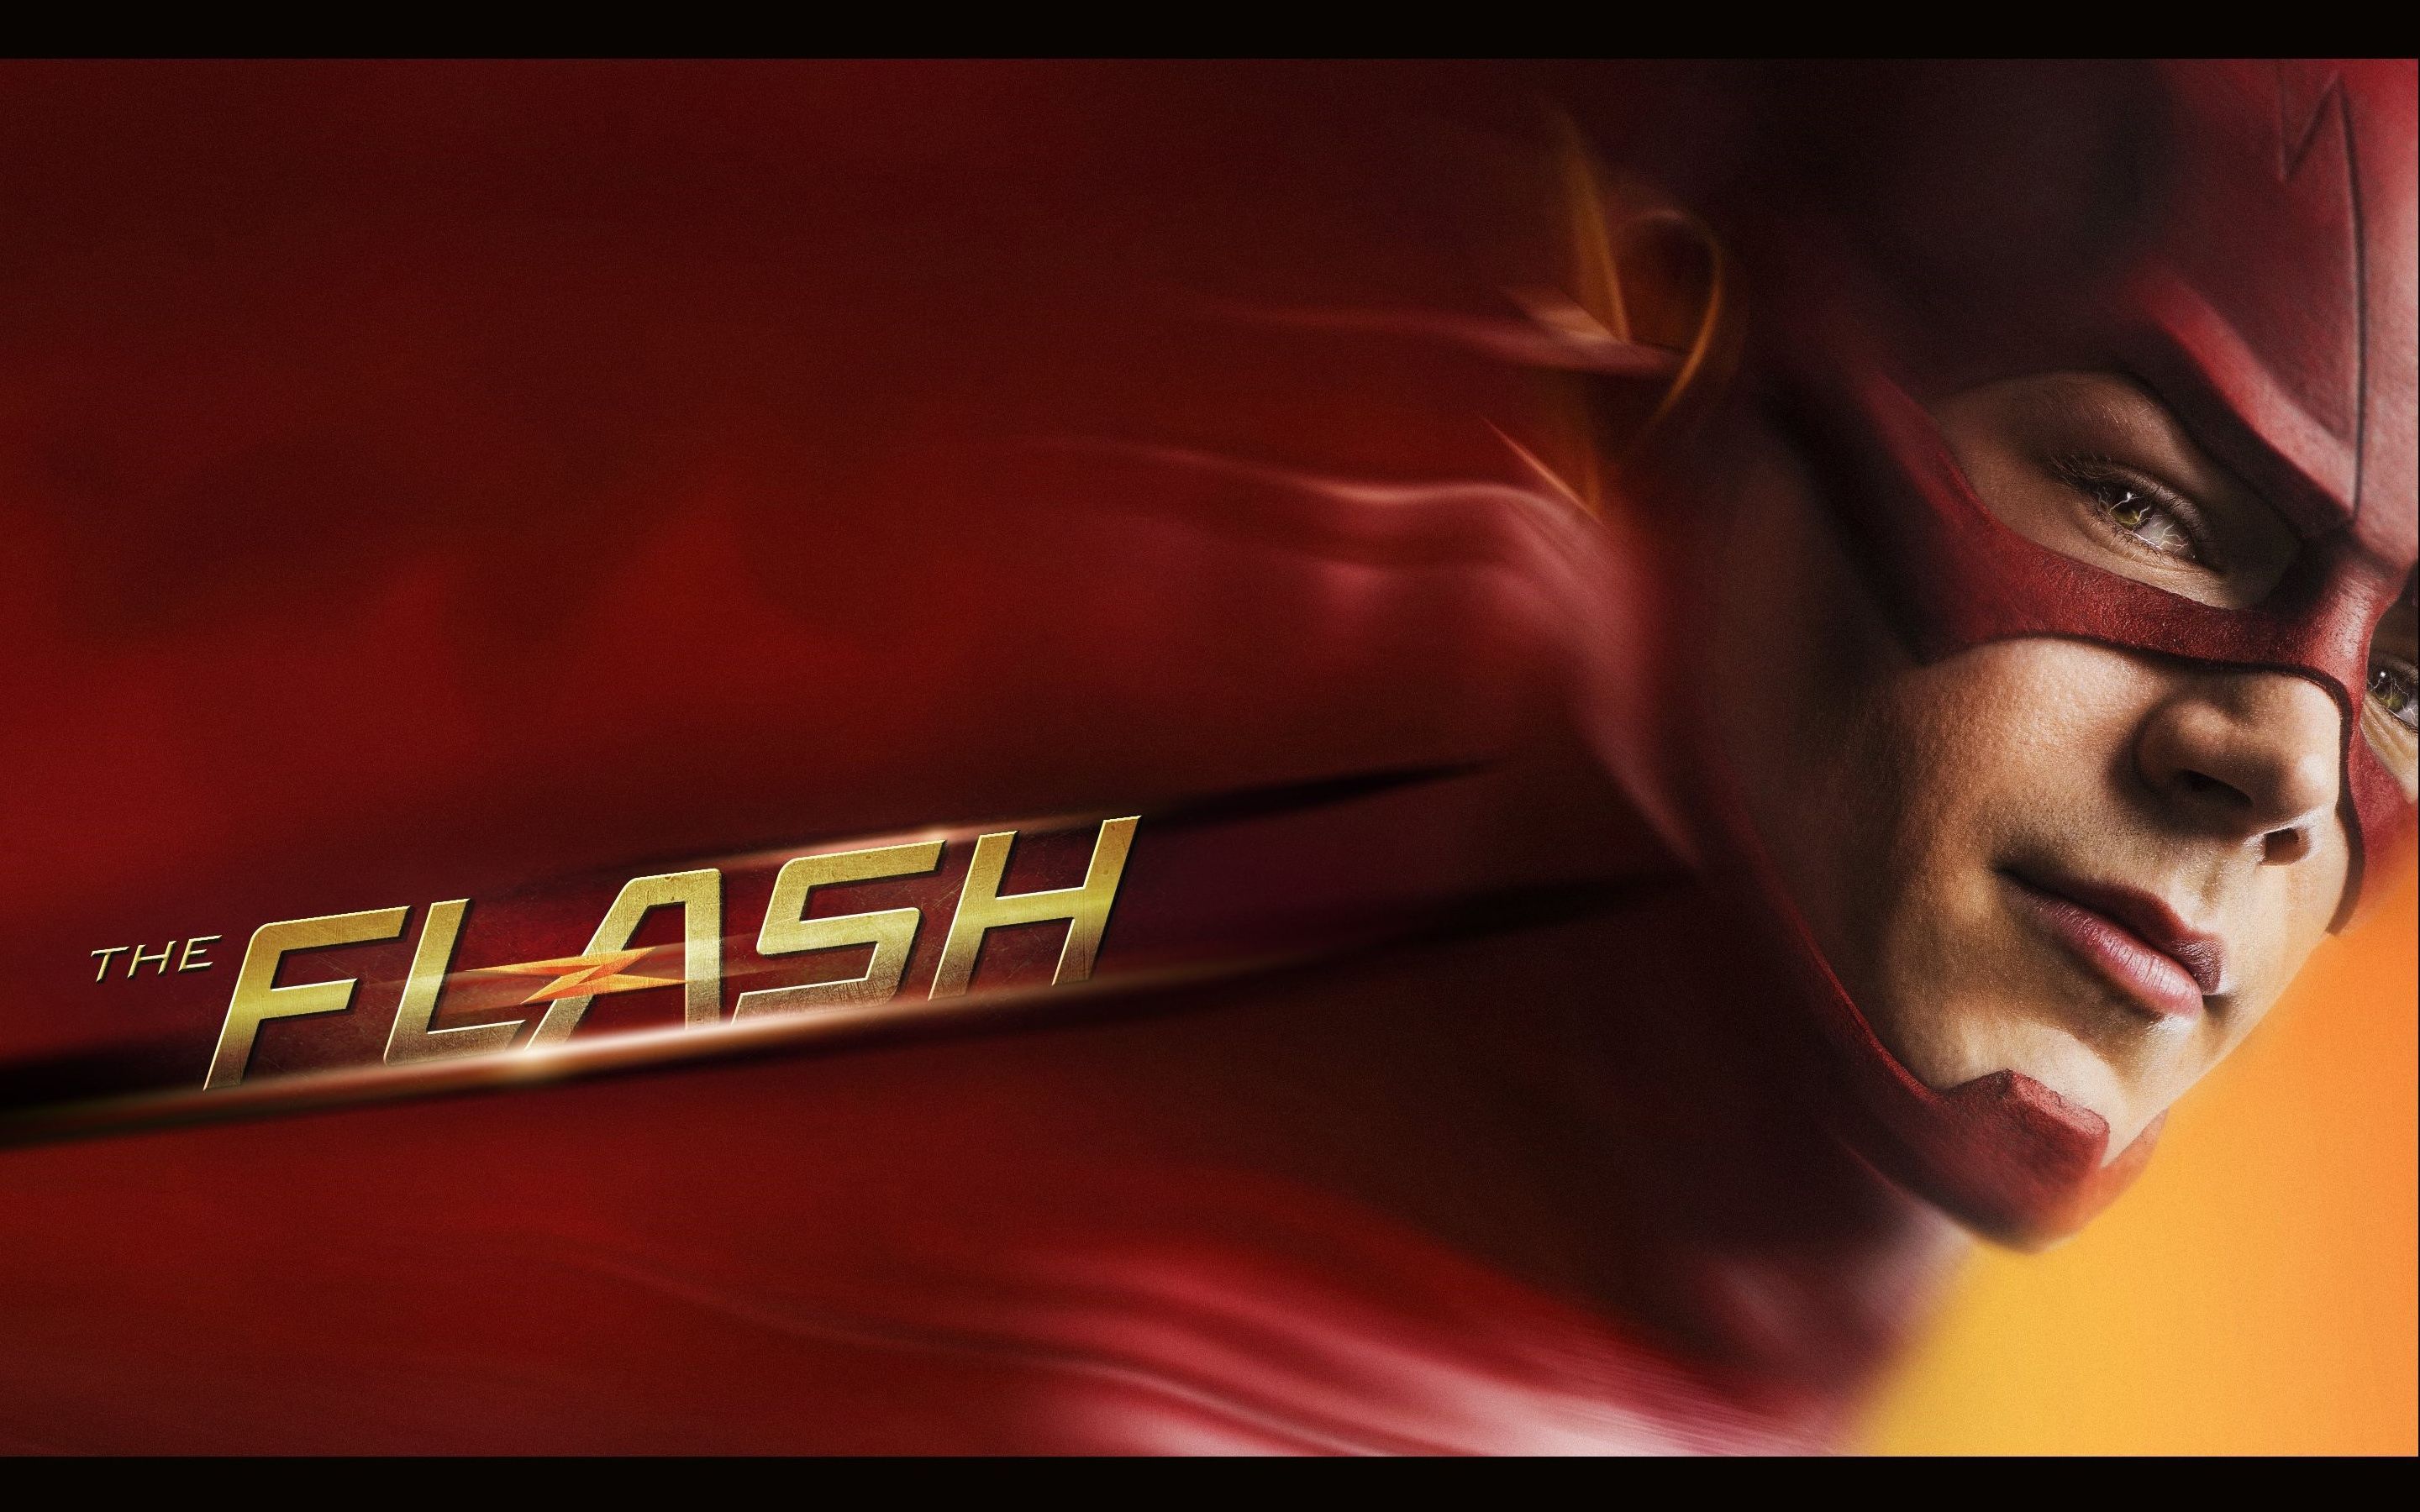 The Flash TV Series Wallpapers HD Backgrounds